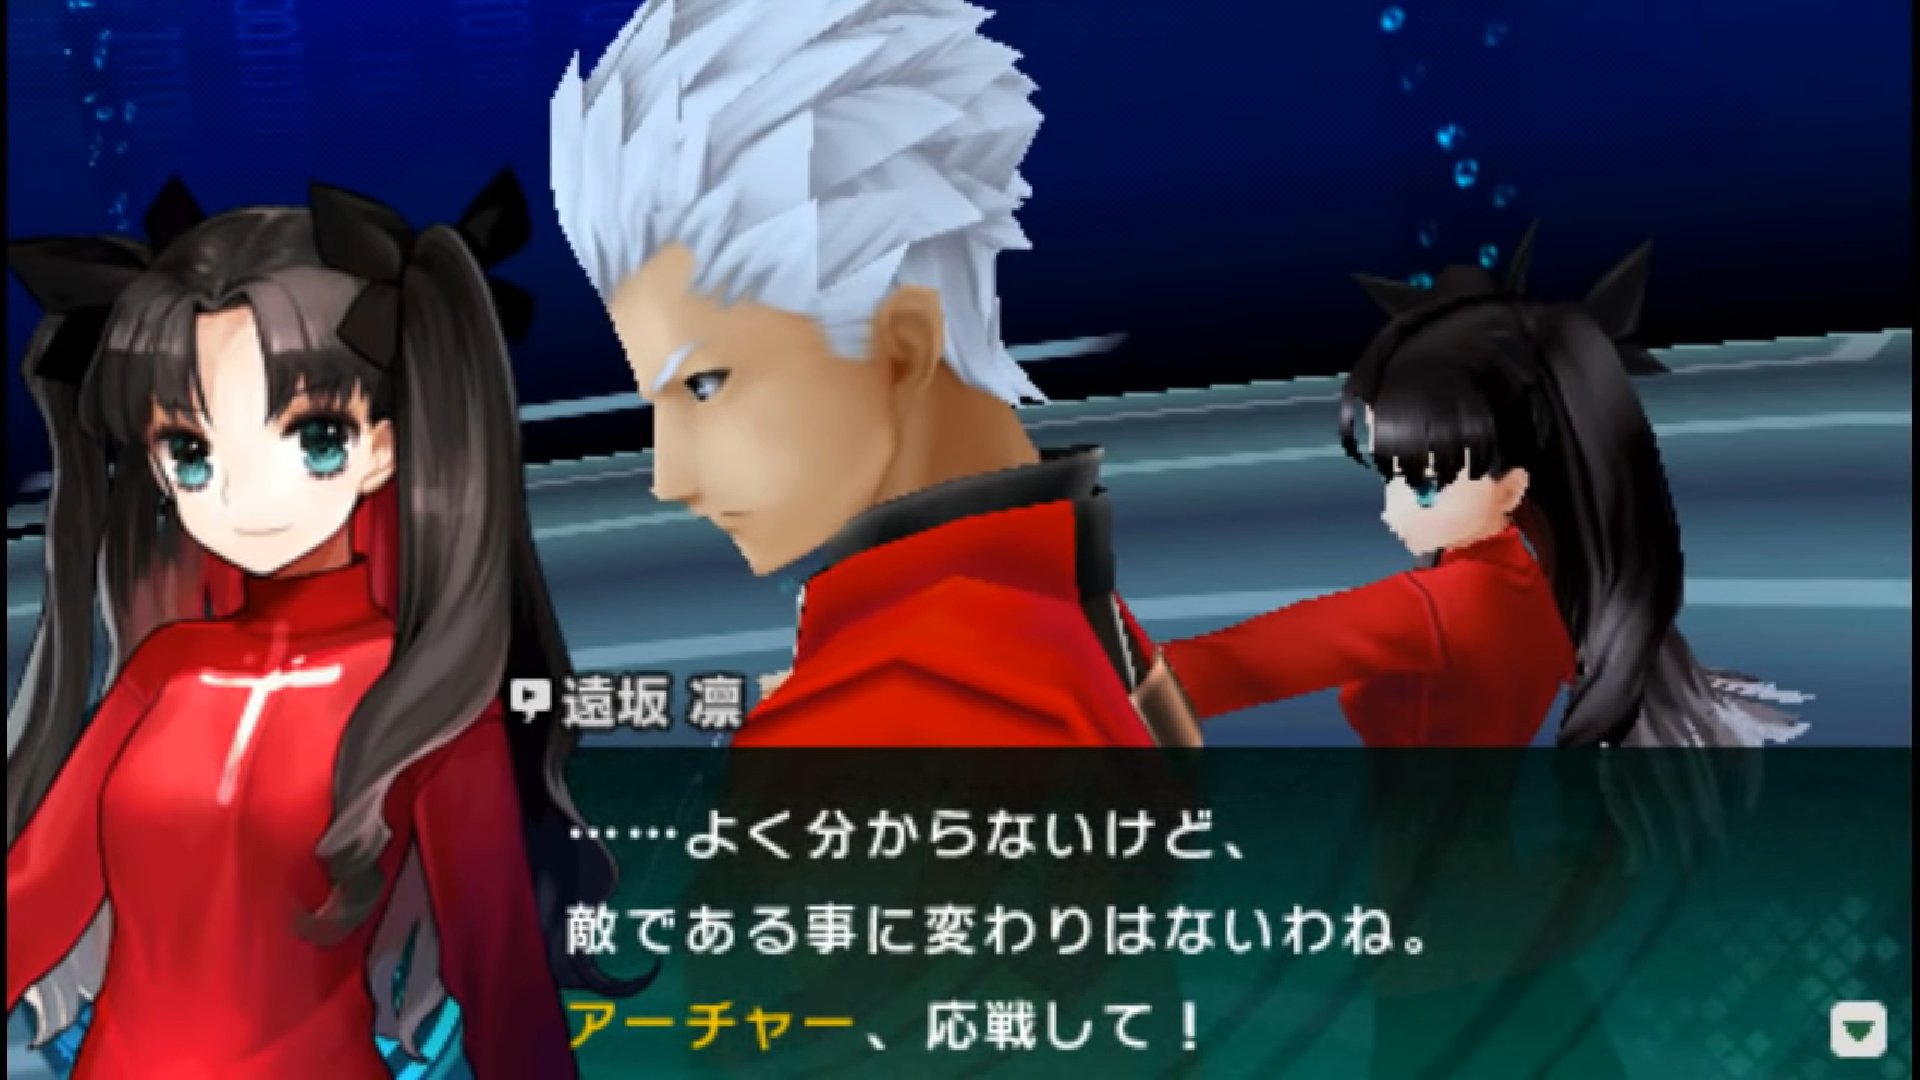 Twitter 上的kars A Fun Note Is That The Original Rin And Her Emiya Do Appear In Fate Extra Ccc Meanwhile Hakuno S Emiya And Rin S Emiya Cynically Comment On How They Have To Fight